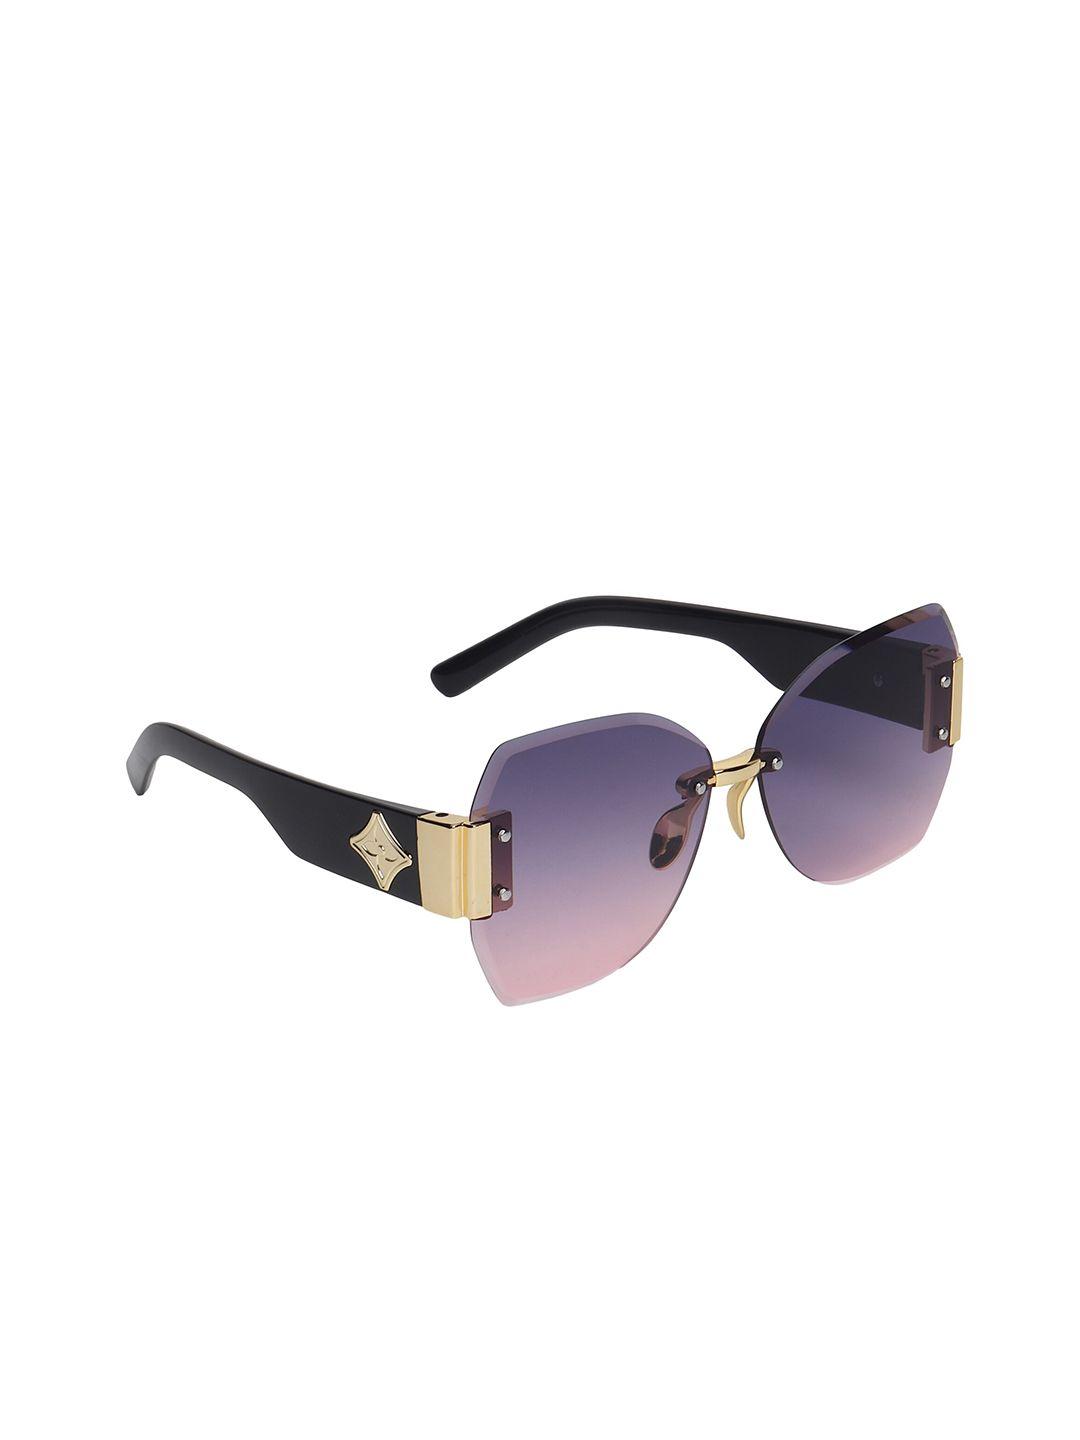 swiss design butterfly sunglasses with uv protected lens sdsg-625-01